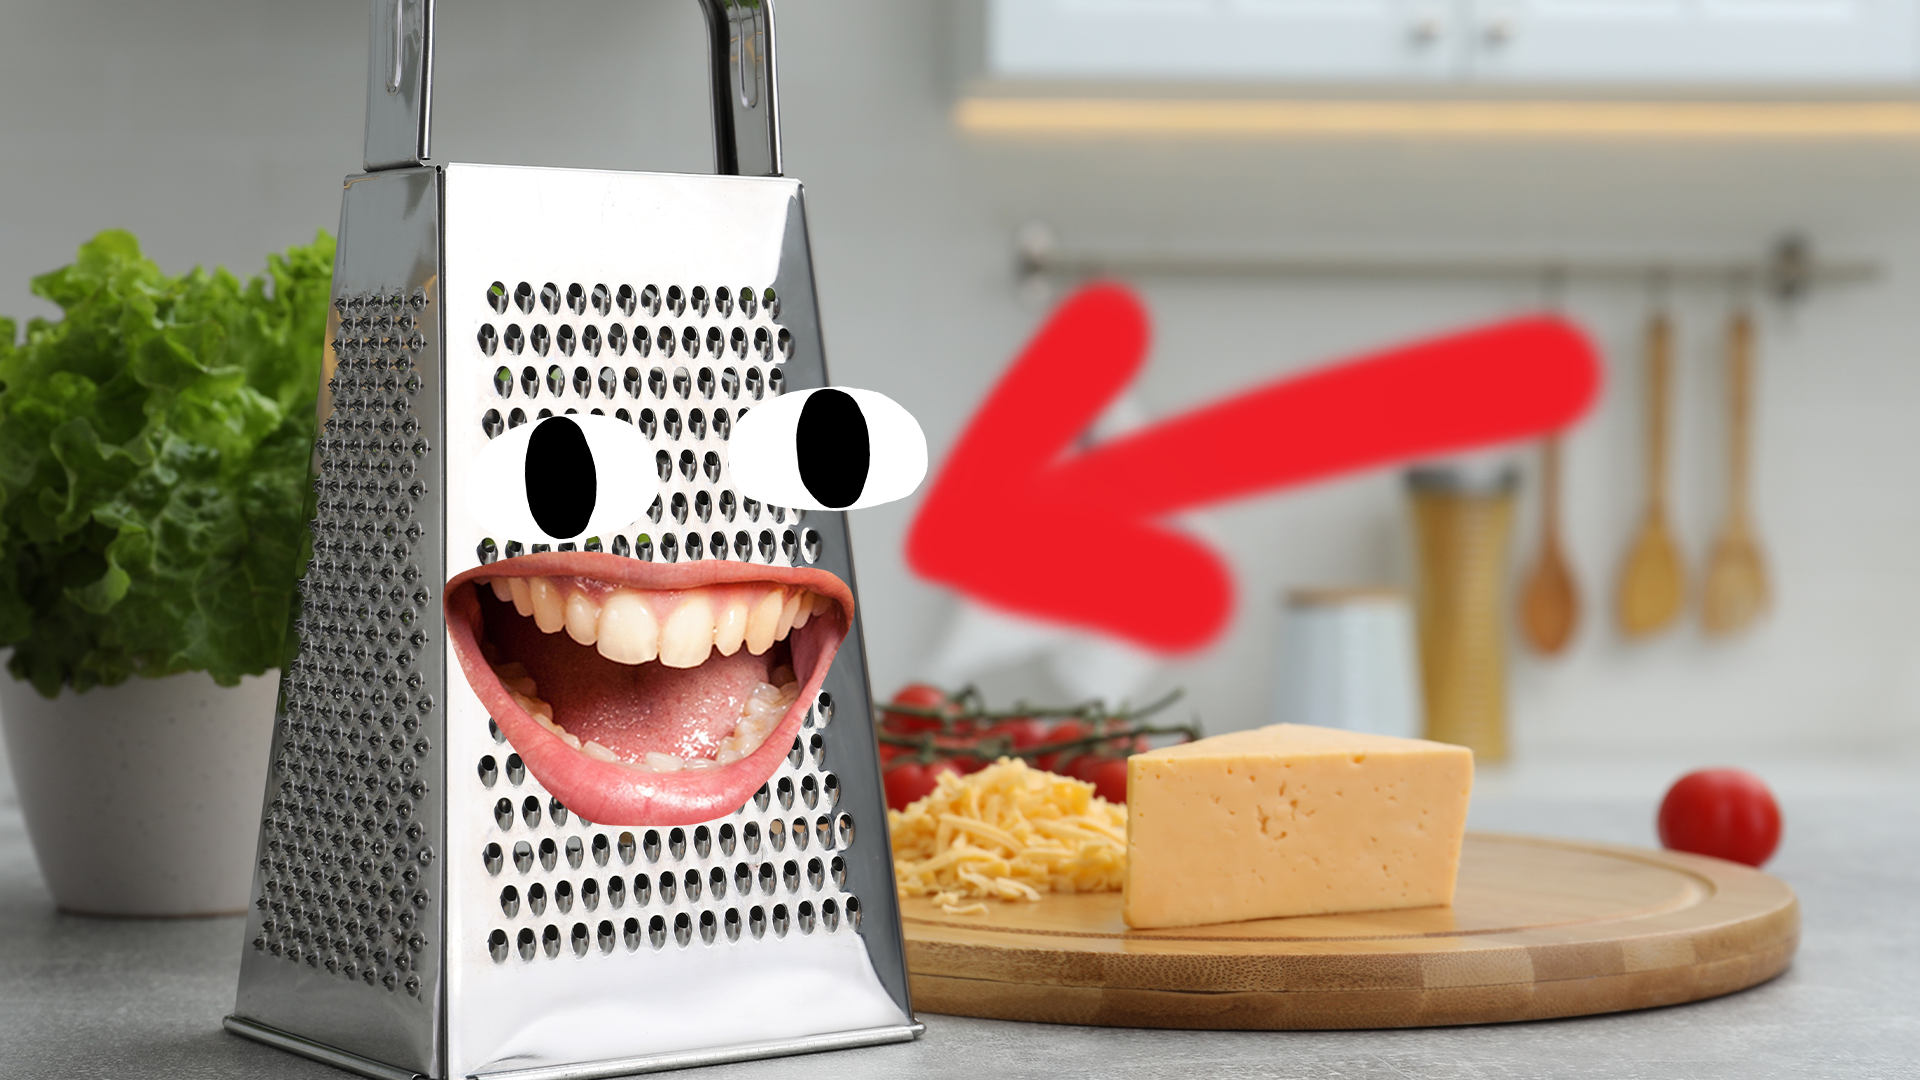 Goofy faced cheese grater 